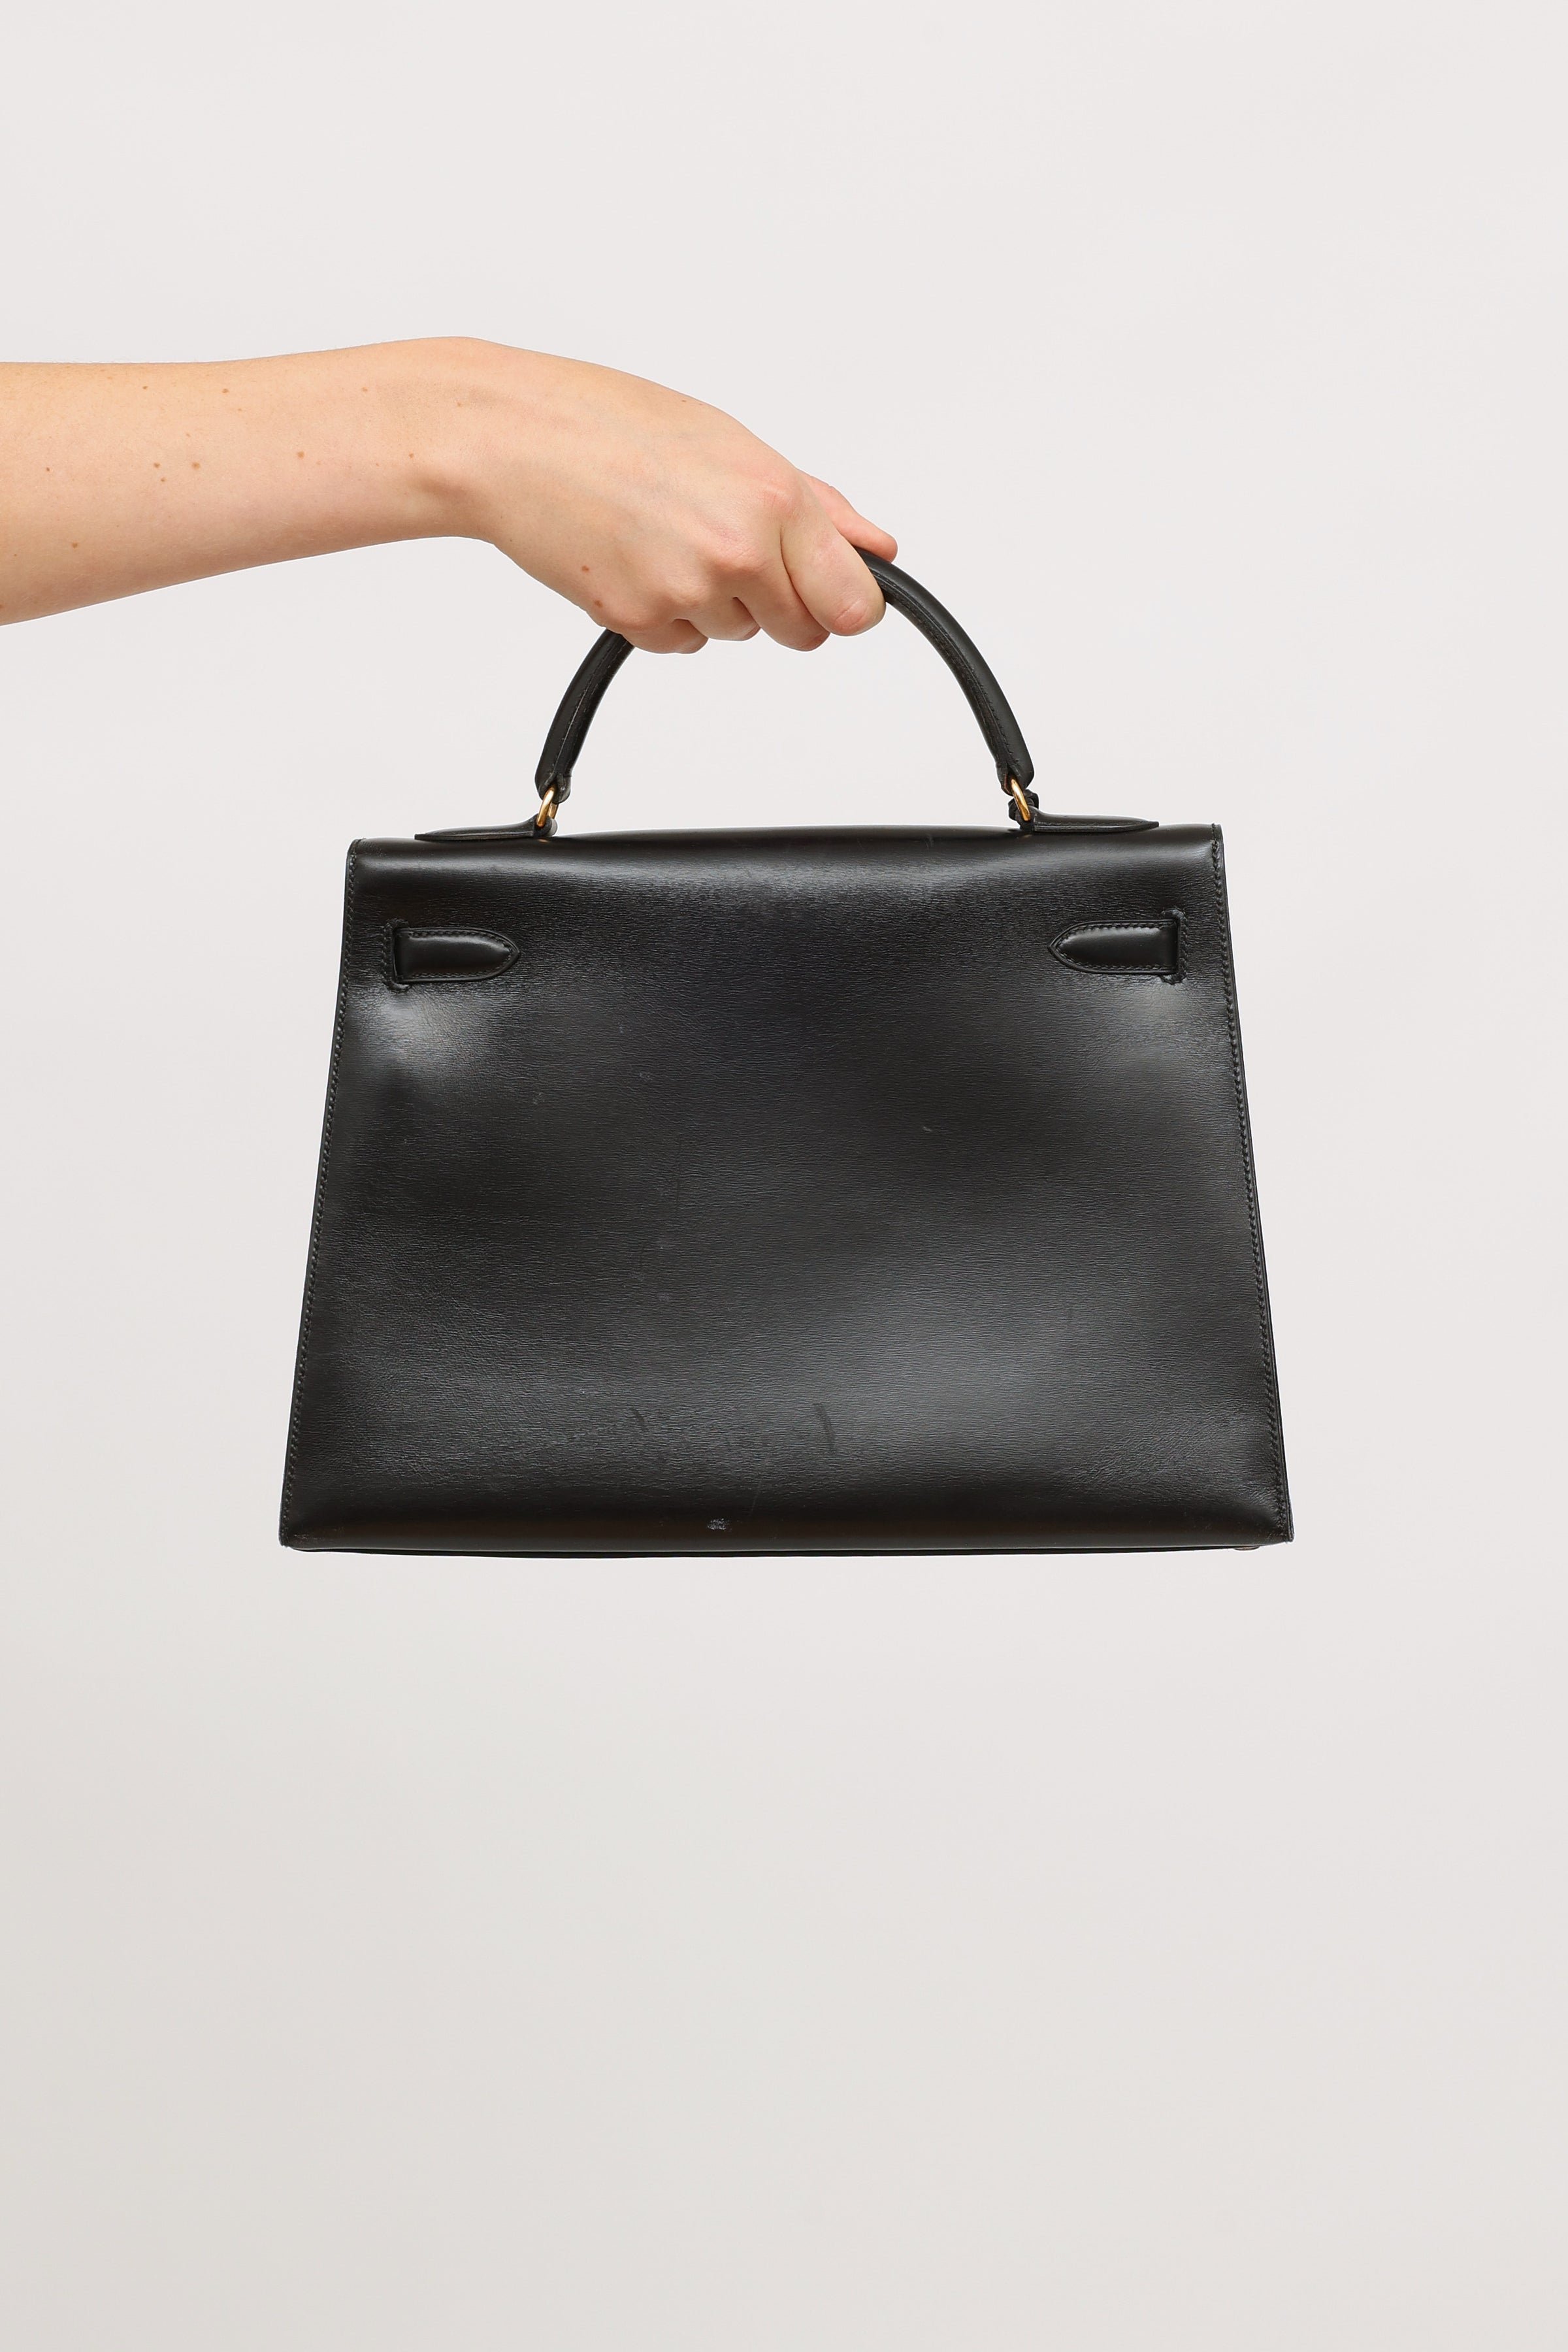 Vintage Hermes Kelly 32 From 1988 in Black Box Leather